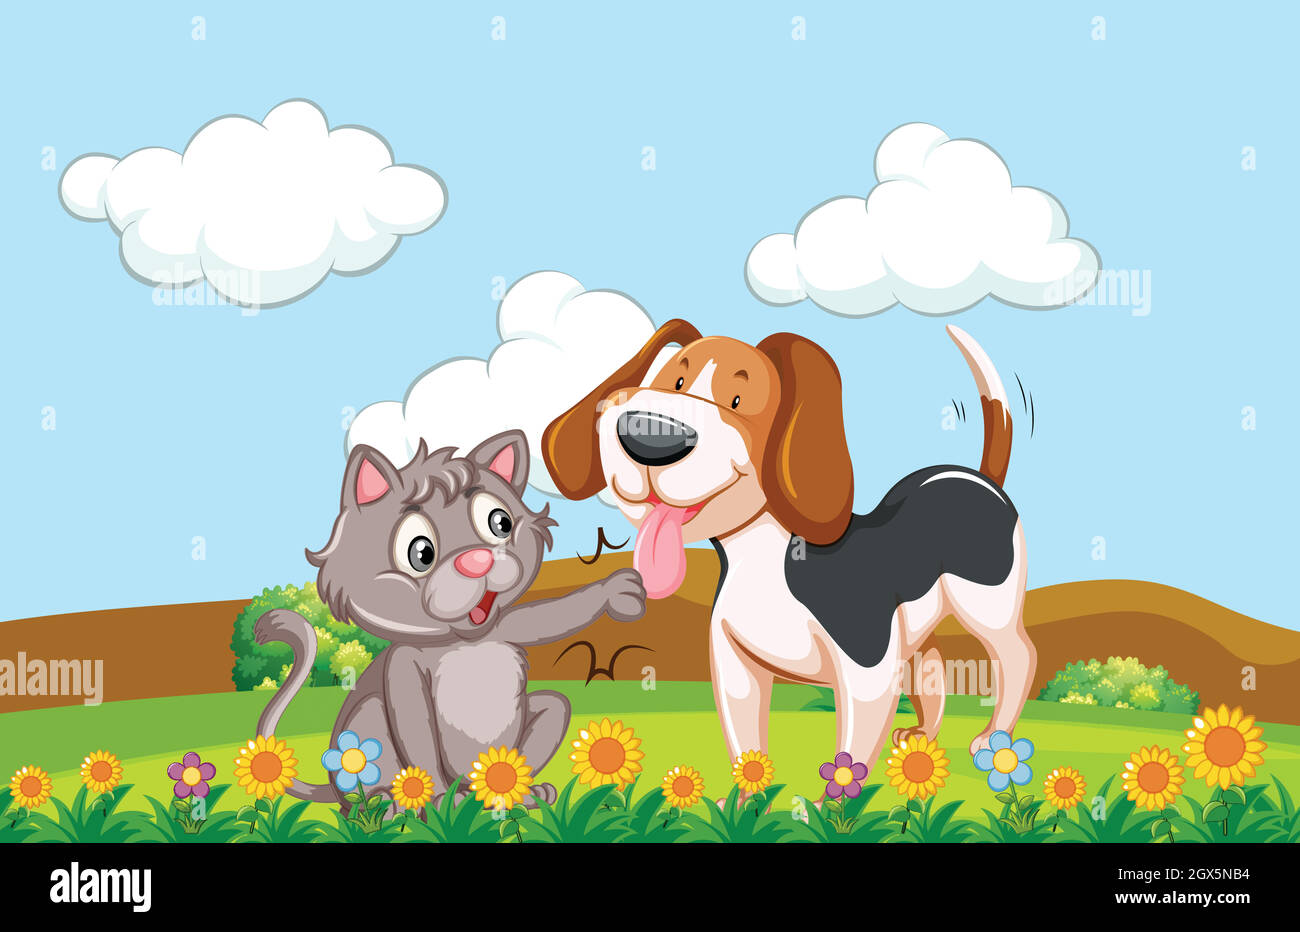 A dog and cat in a garden Stock Vector